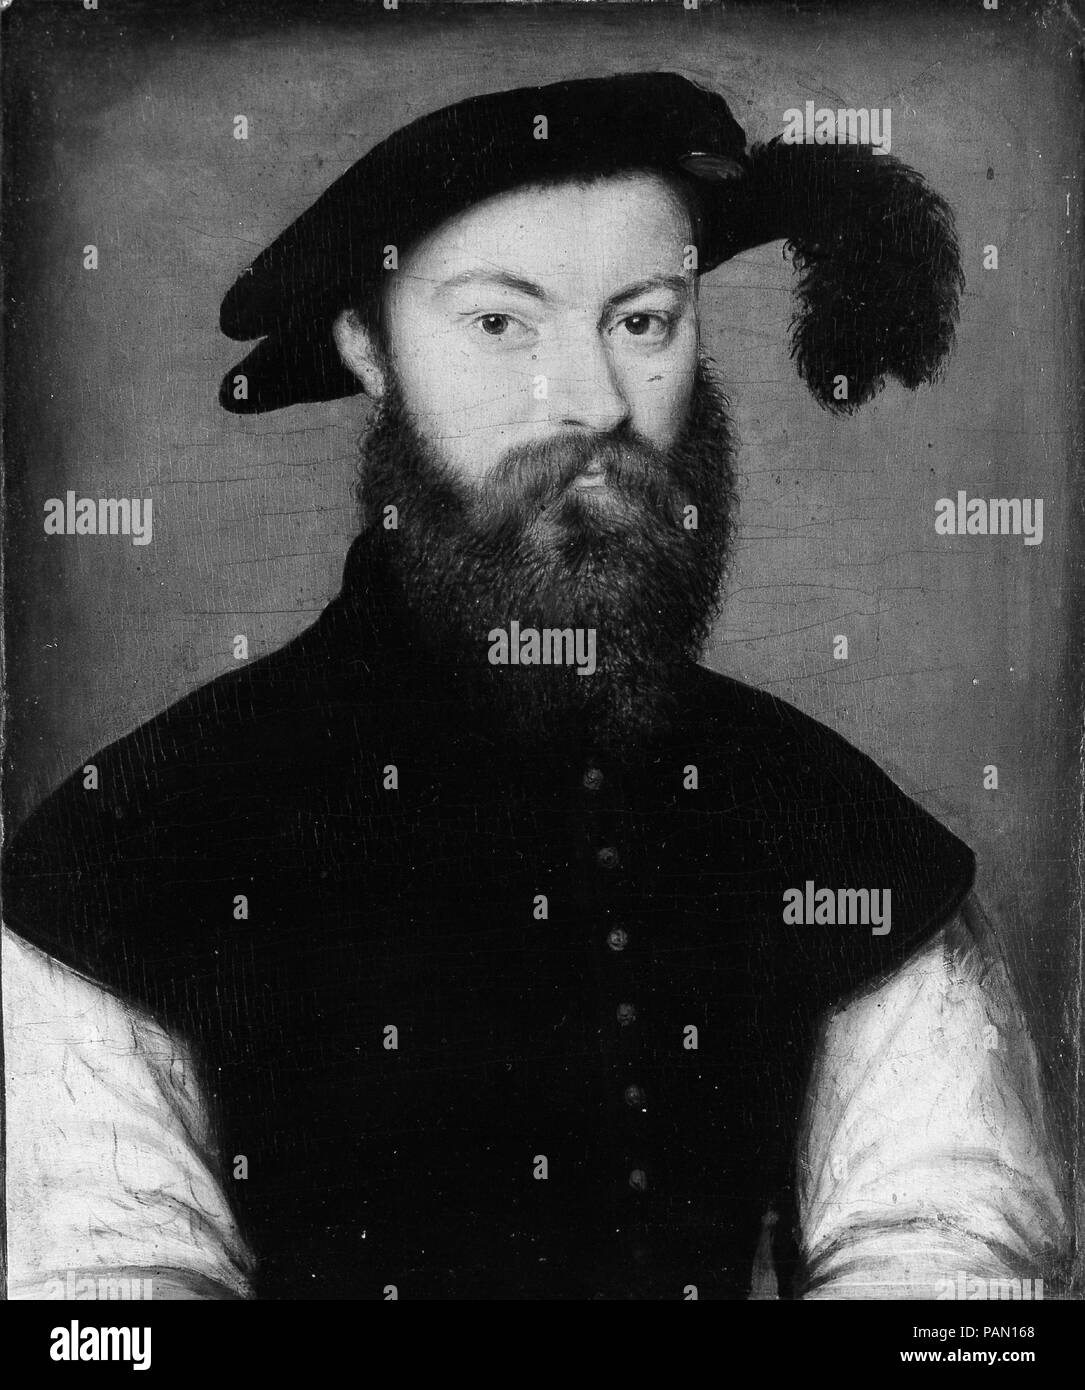 Portrait of a Man with a Black-Plumed Hat. Artist: Attributed to Corneille de Lyon (Netherlandish, The Hague, active by 1533-died 1575 Lyons). Dimensions: 7 x 5 1/2 in. (17.8 x 14 cm); with added strips, 8 1/2 x 6 in. (21.6 x 15.2 cm). Date: ca. 1535-40.  A replica of this panel is in the Museum of Fine Arts, Houston. Museum: Metropolitan Museum of Art, New York, USA. Stock Photo